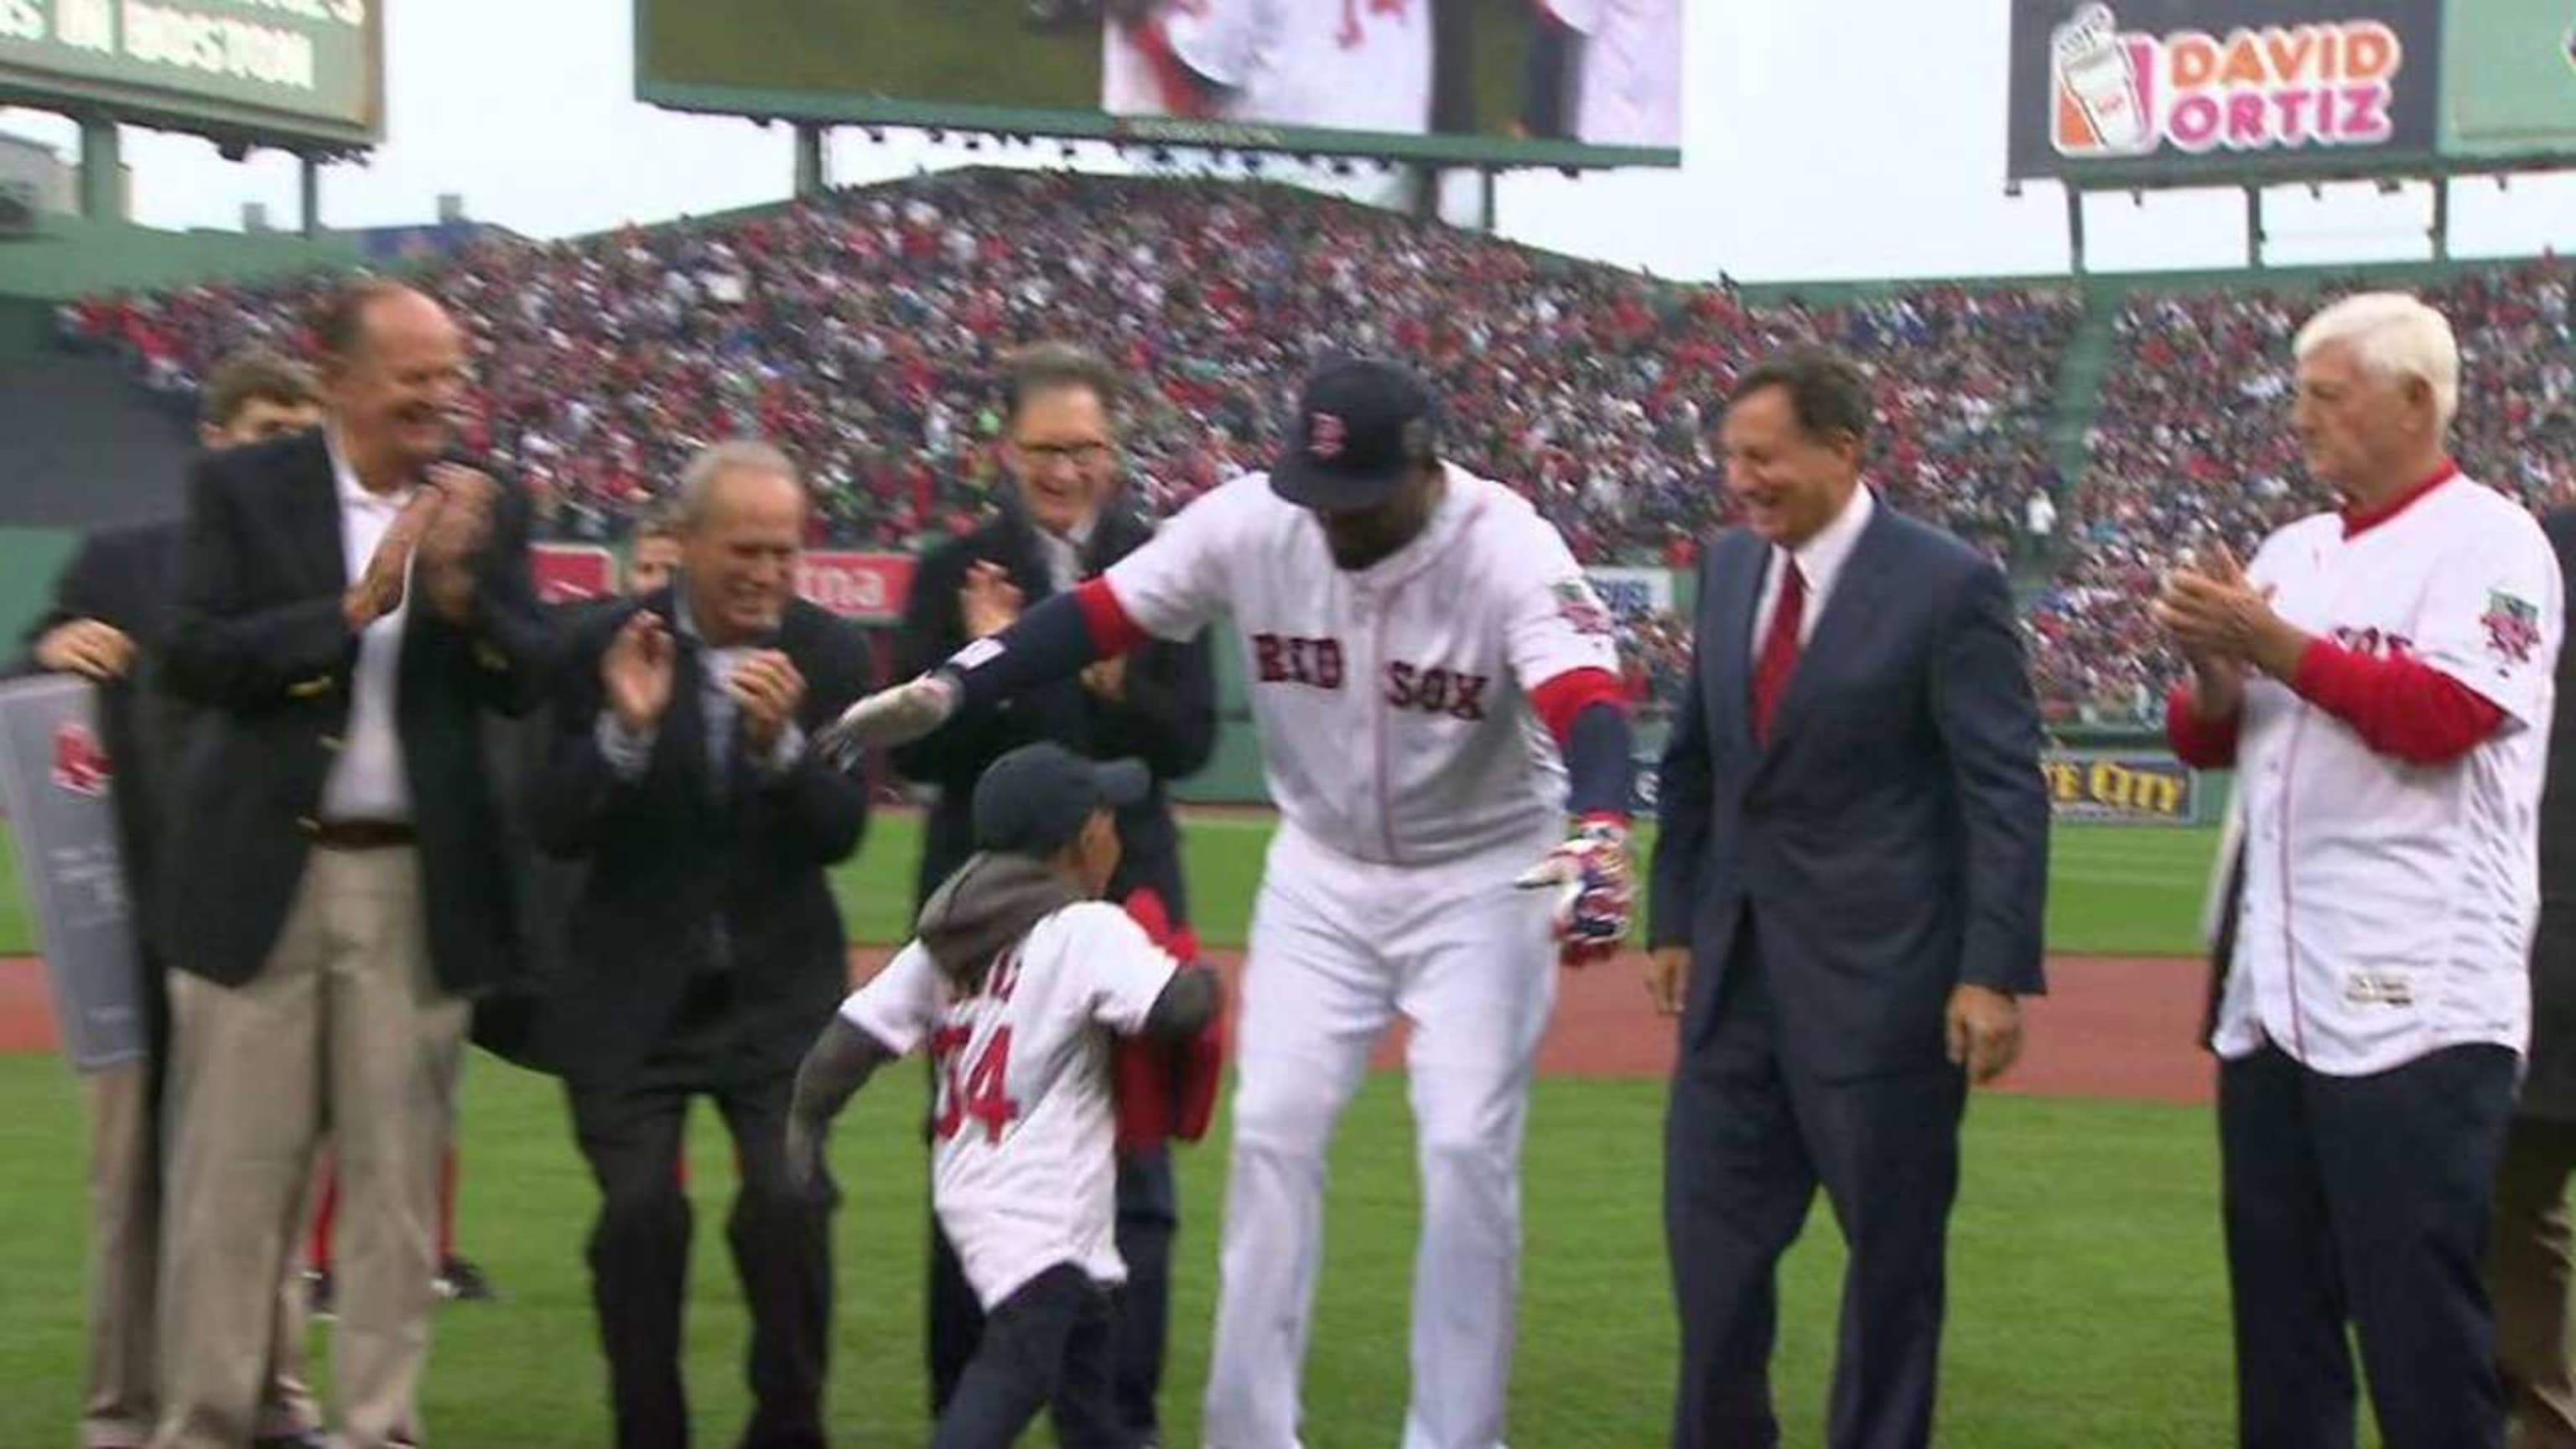 David Ortiz's wife offers Father's Day tribute to Big Papi